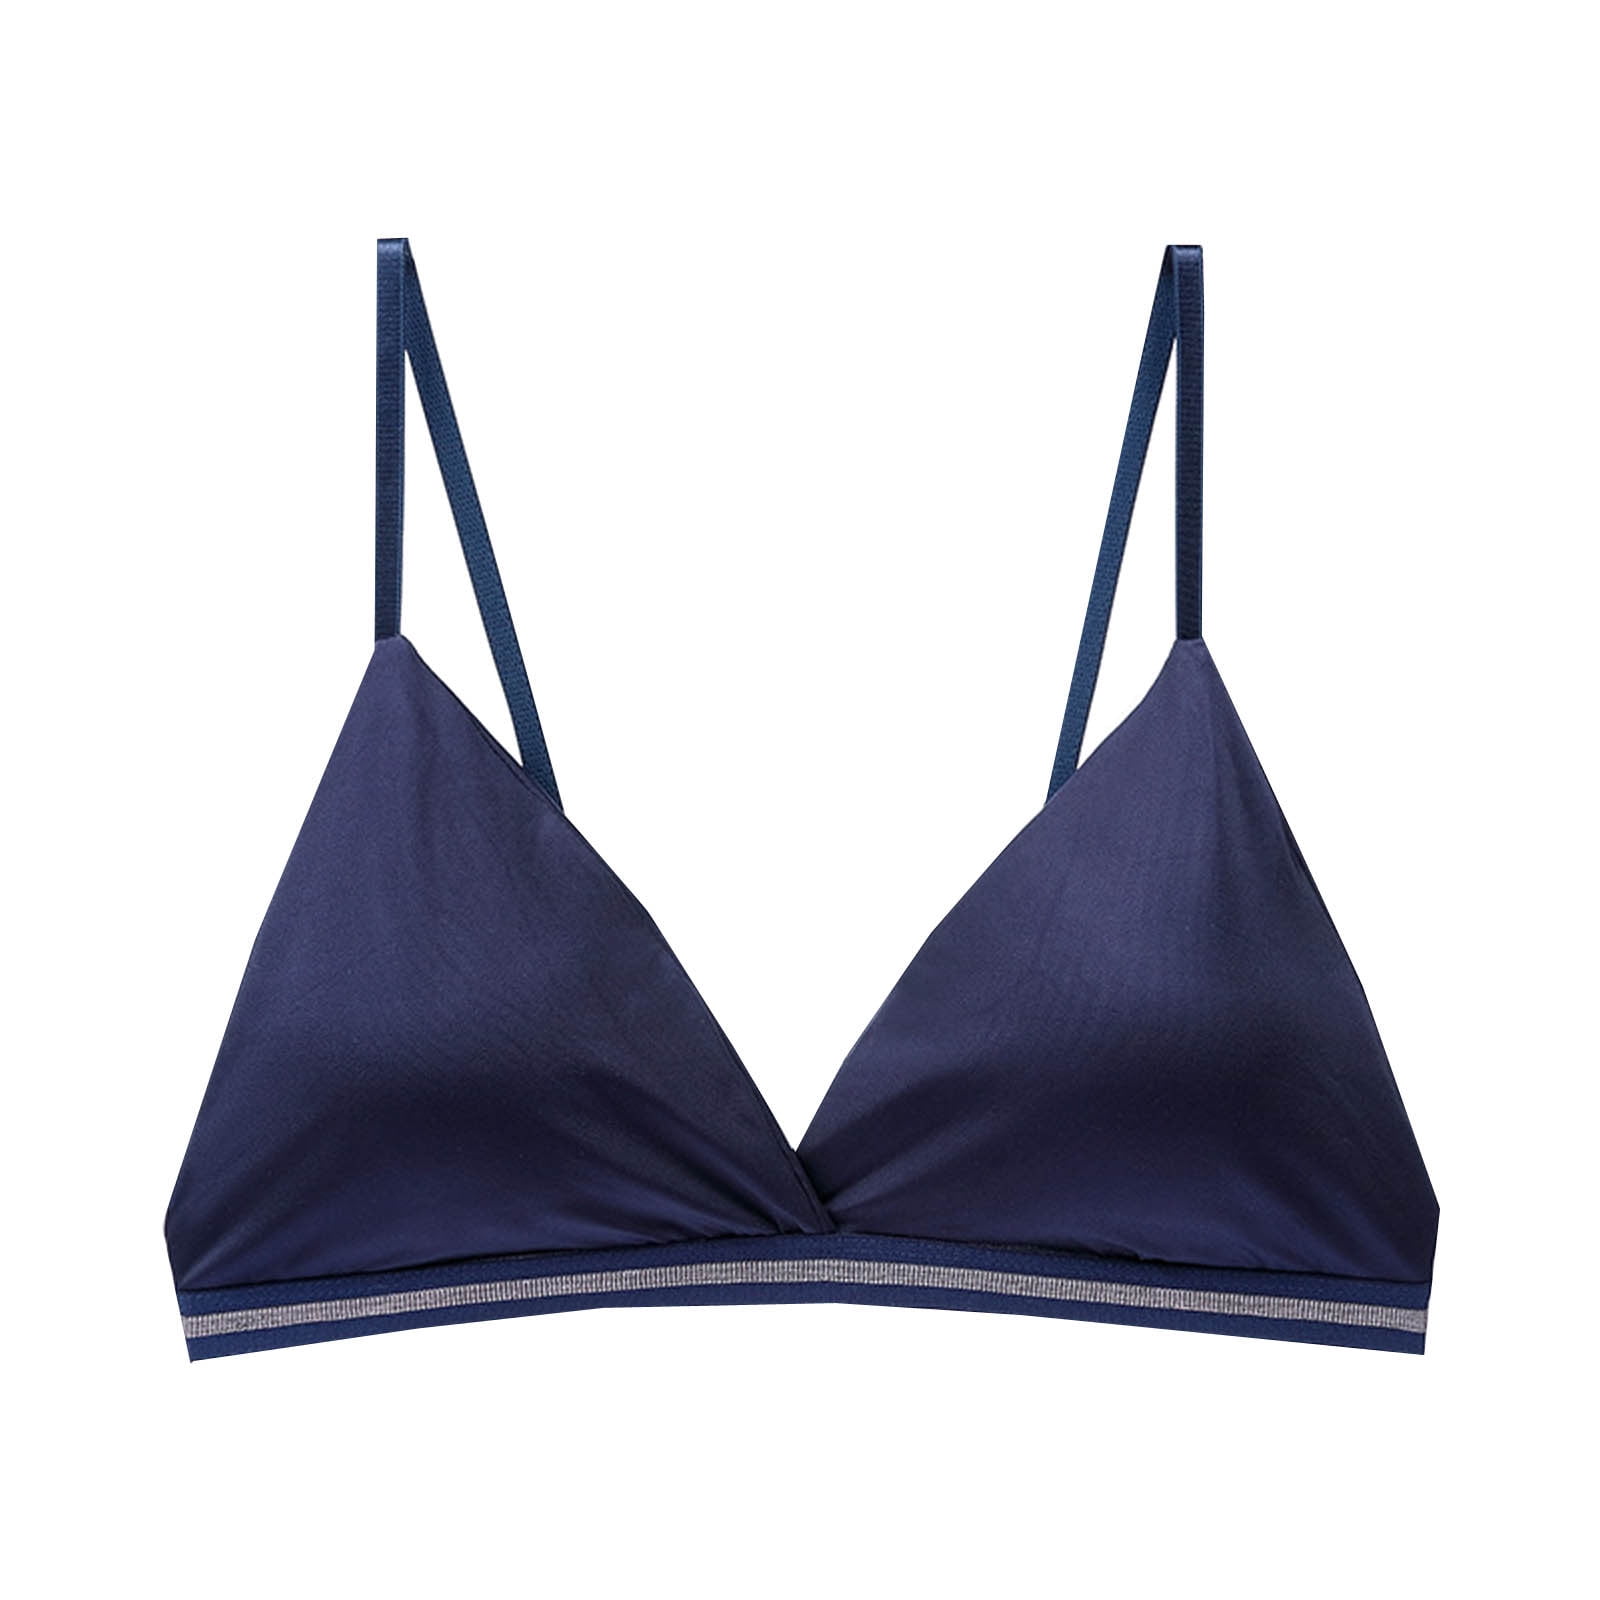 RYRJJ Women's Silk Satin Triangle Bralette Soft Cup Wireless Bra Smooth and  Comfortable Wire Free Bra Top(Navy,L) 